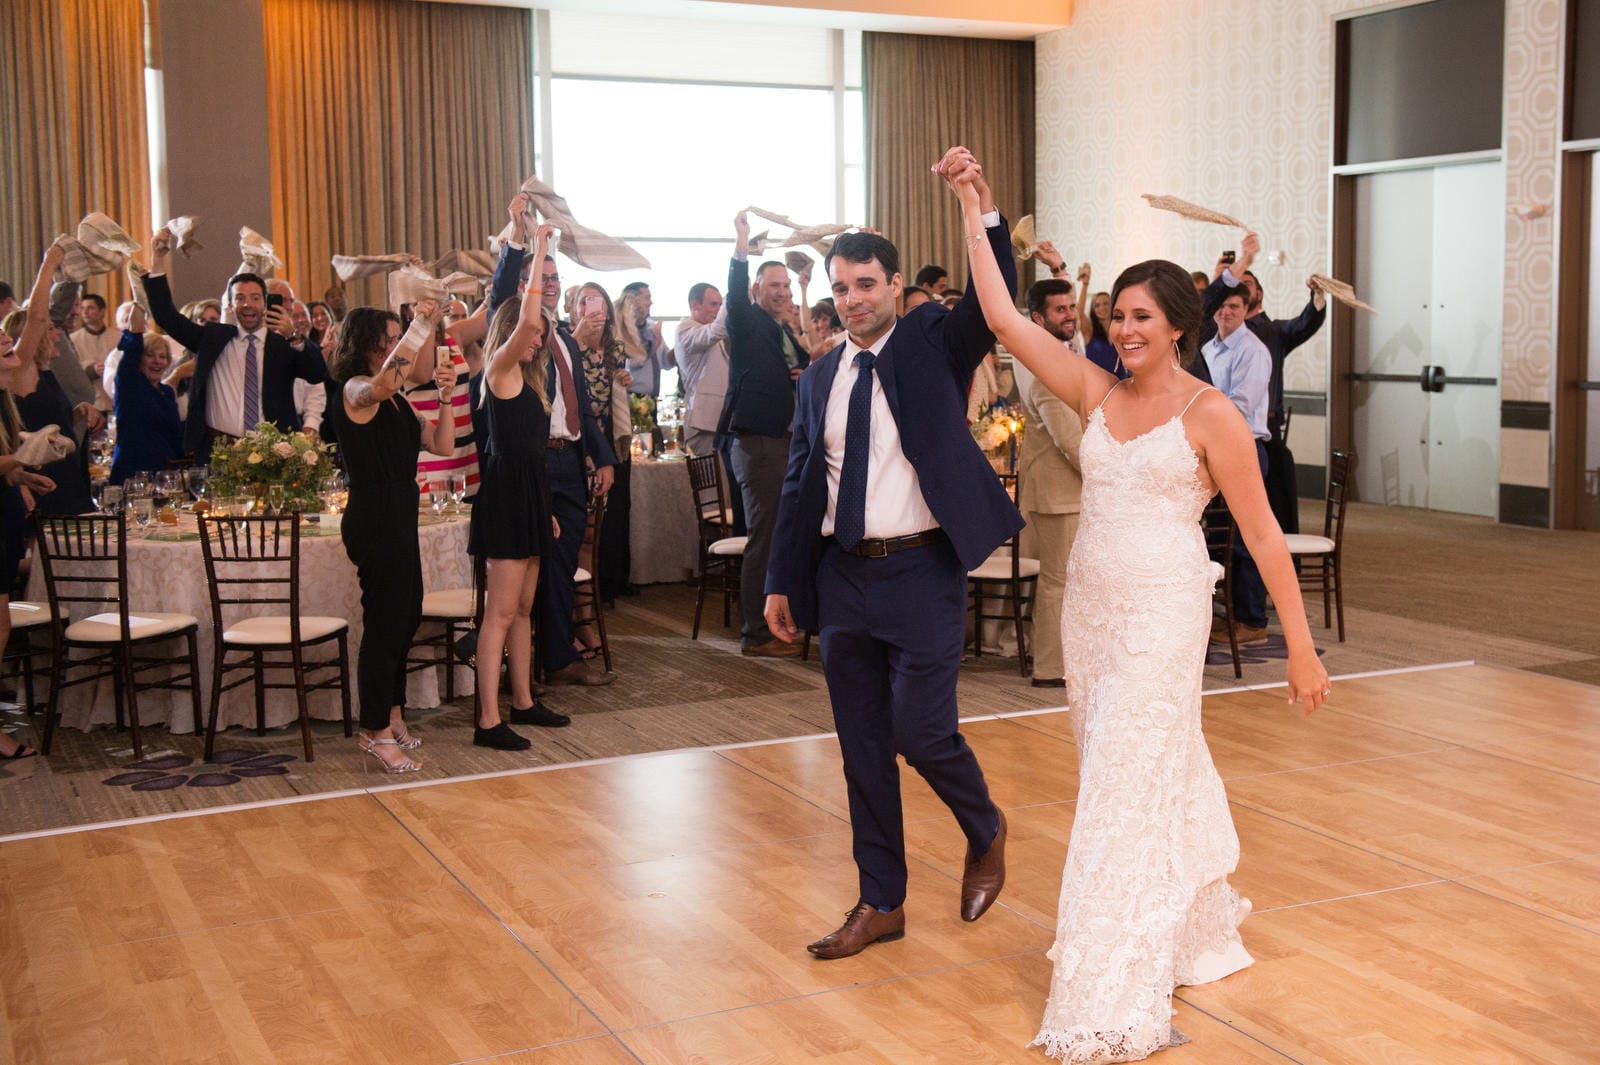 A bride and groom hold each other's hand in the air as they enter their wedding reception. Guests are waving their napkins above their heads during their Wedding Photography at Fairmont Hotel Pittsburgh.